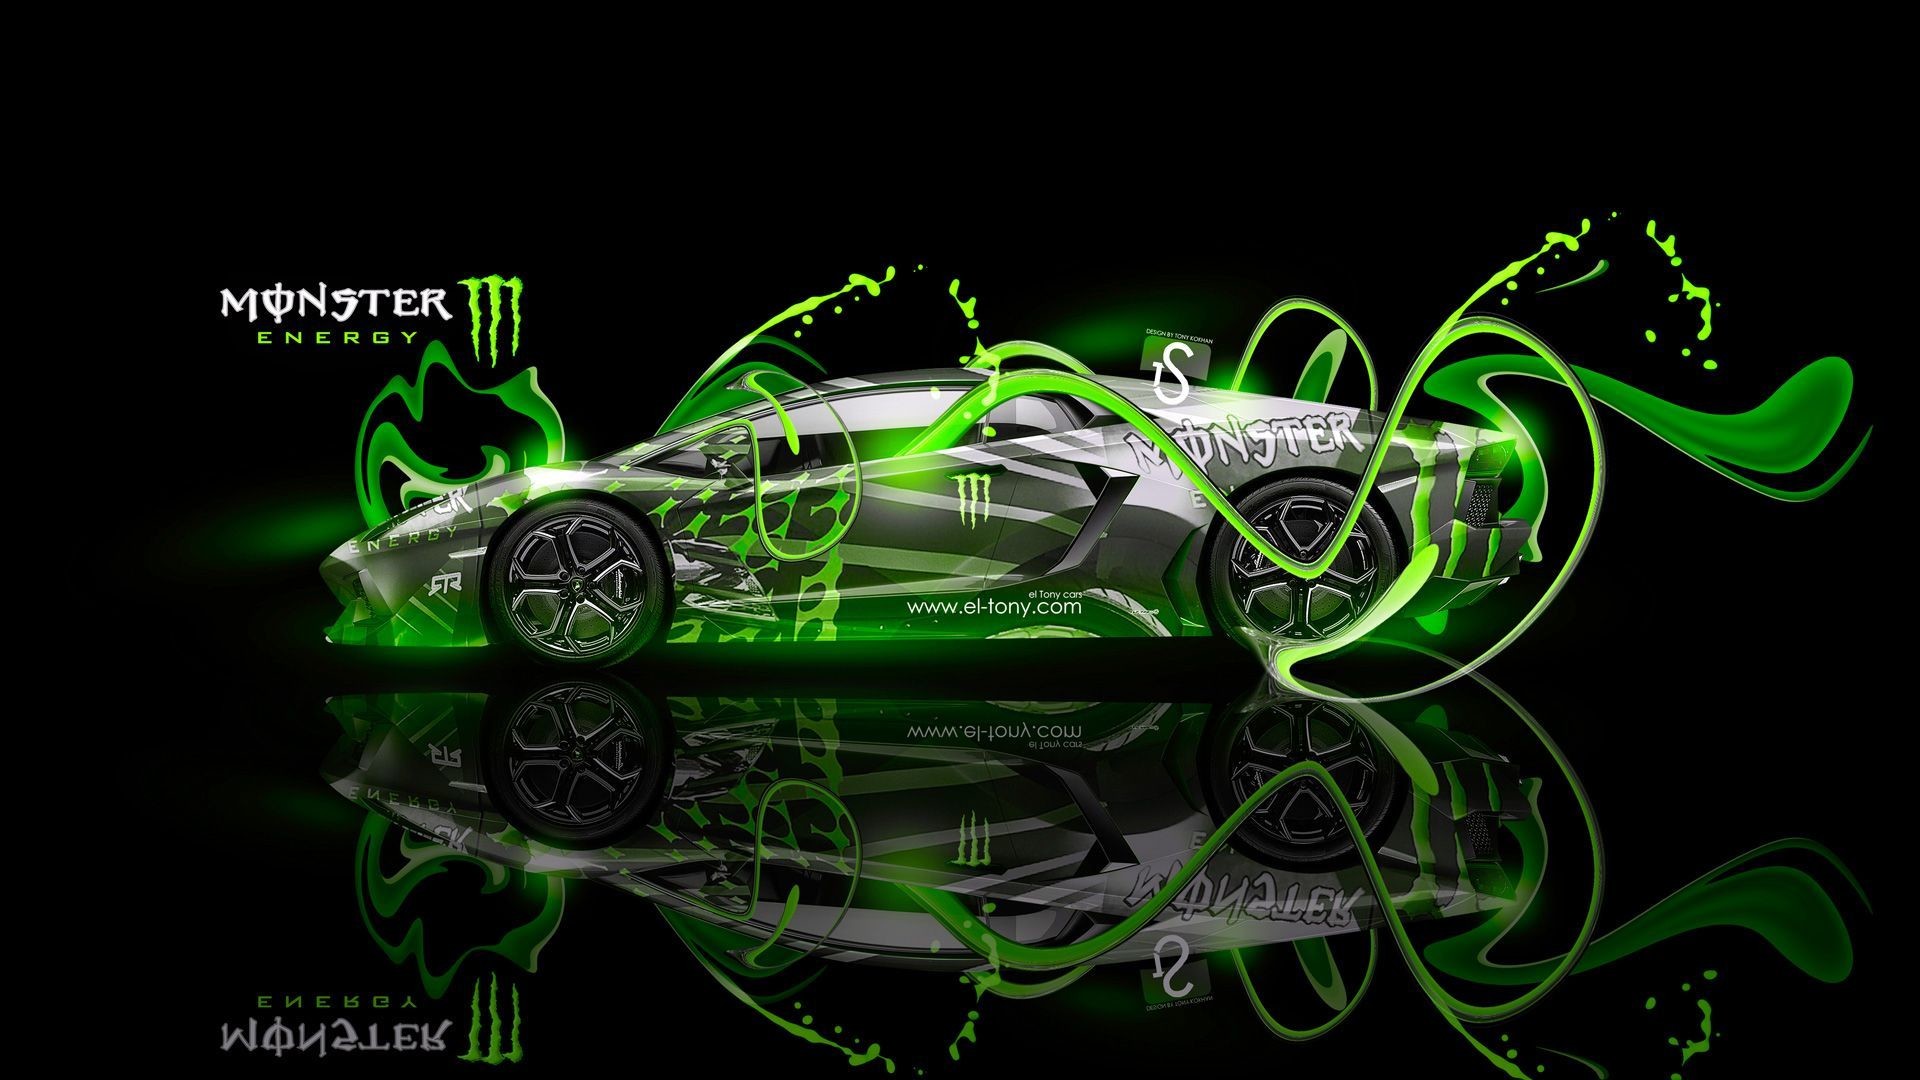 1920x1080 1920x1280 Monster Energy Free hd wallpapers Page 0 | WallpaperLepi">